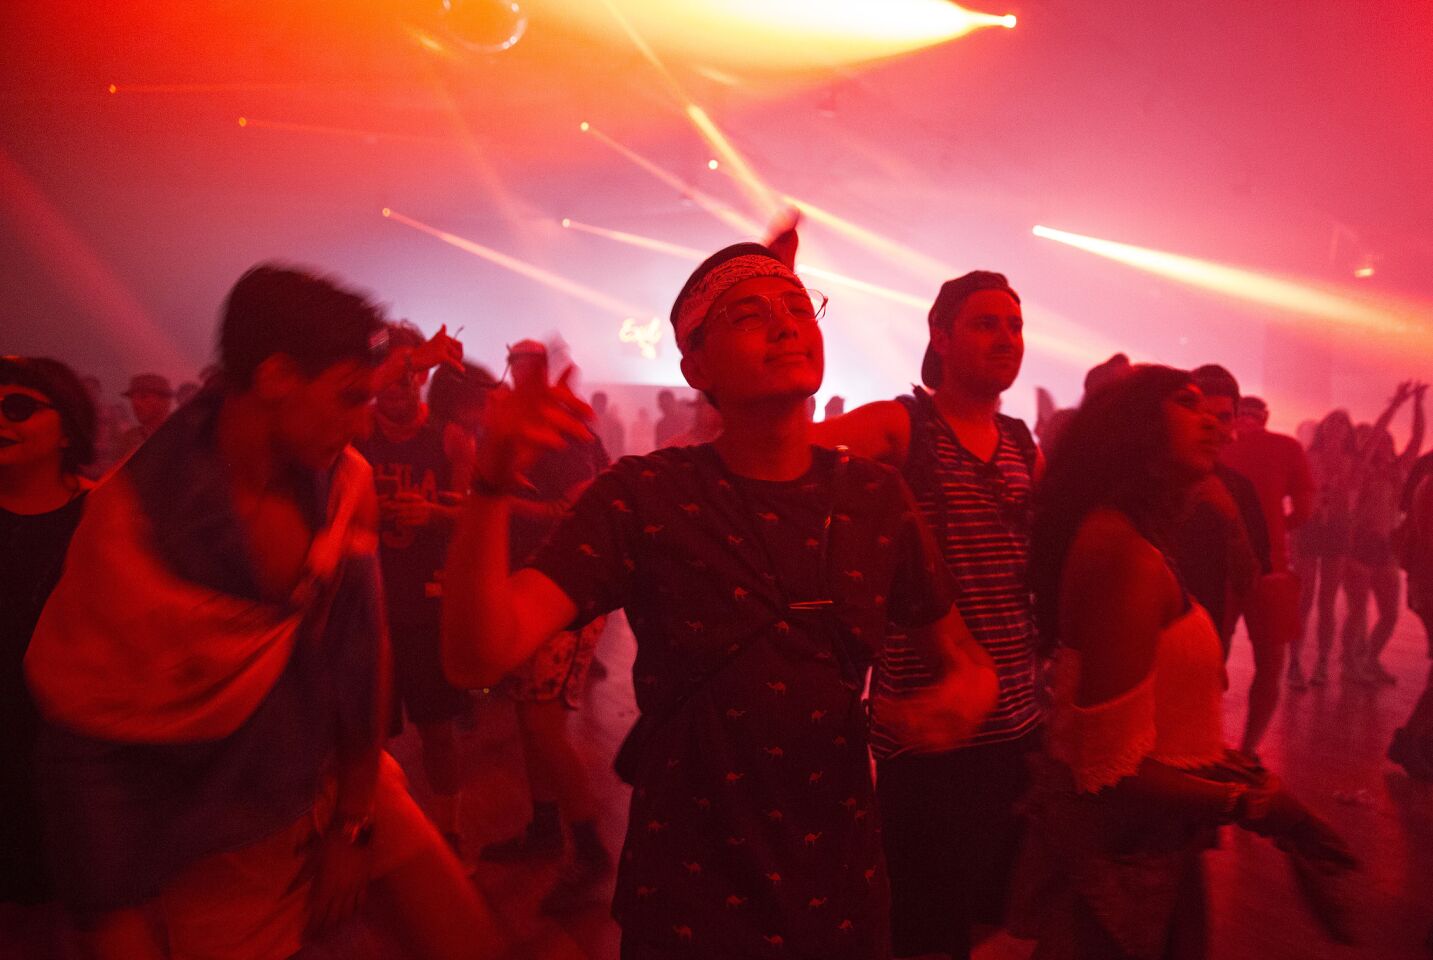 Festivalgoers groove in the Yuma tent at the festival in Indio.